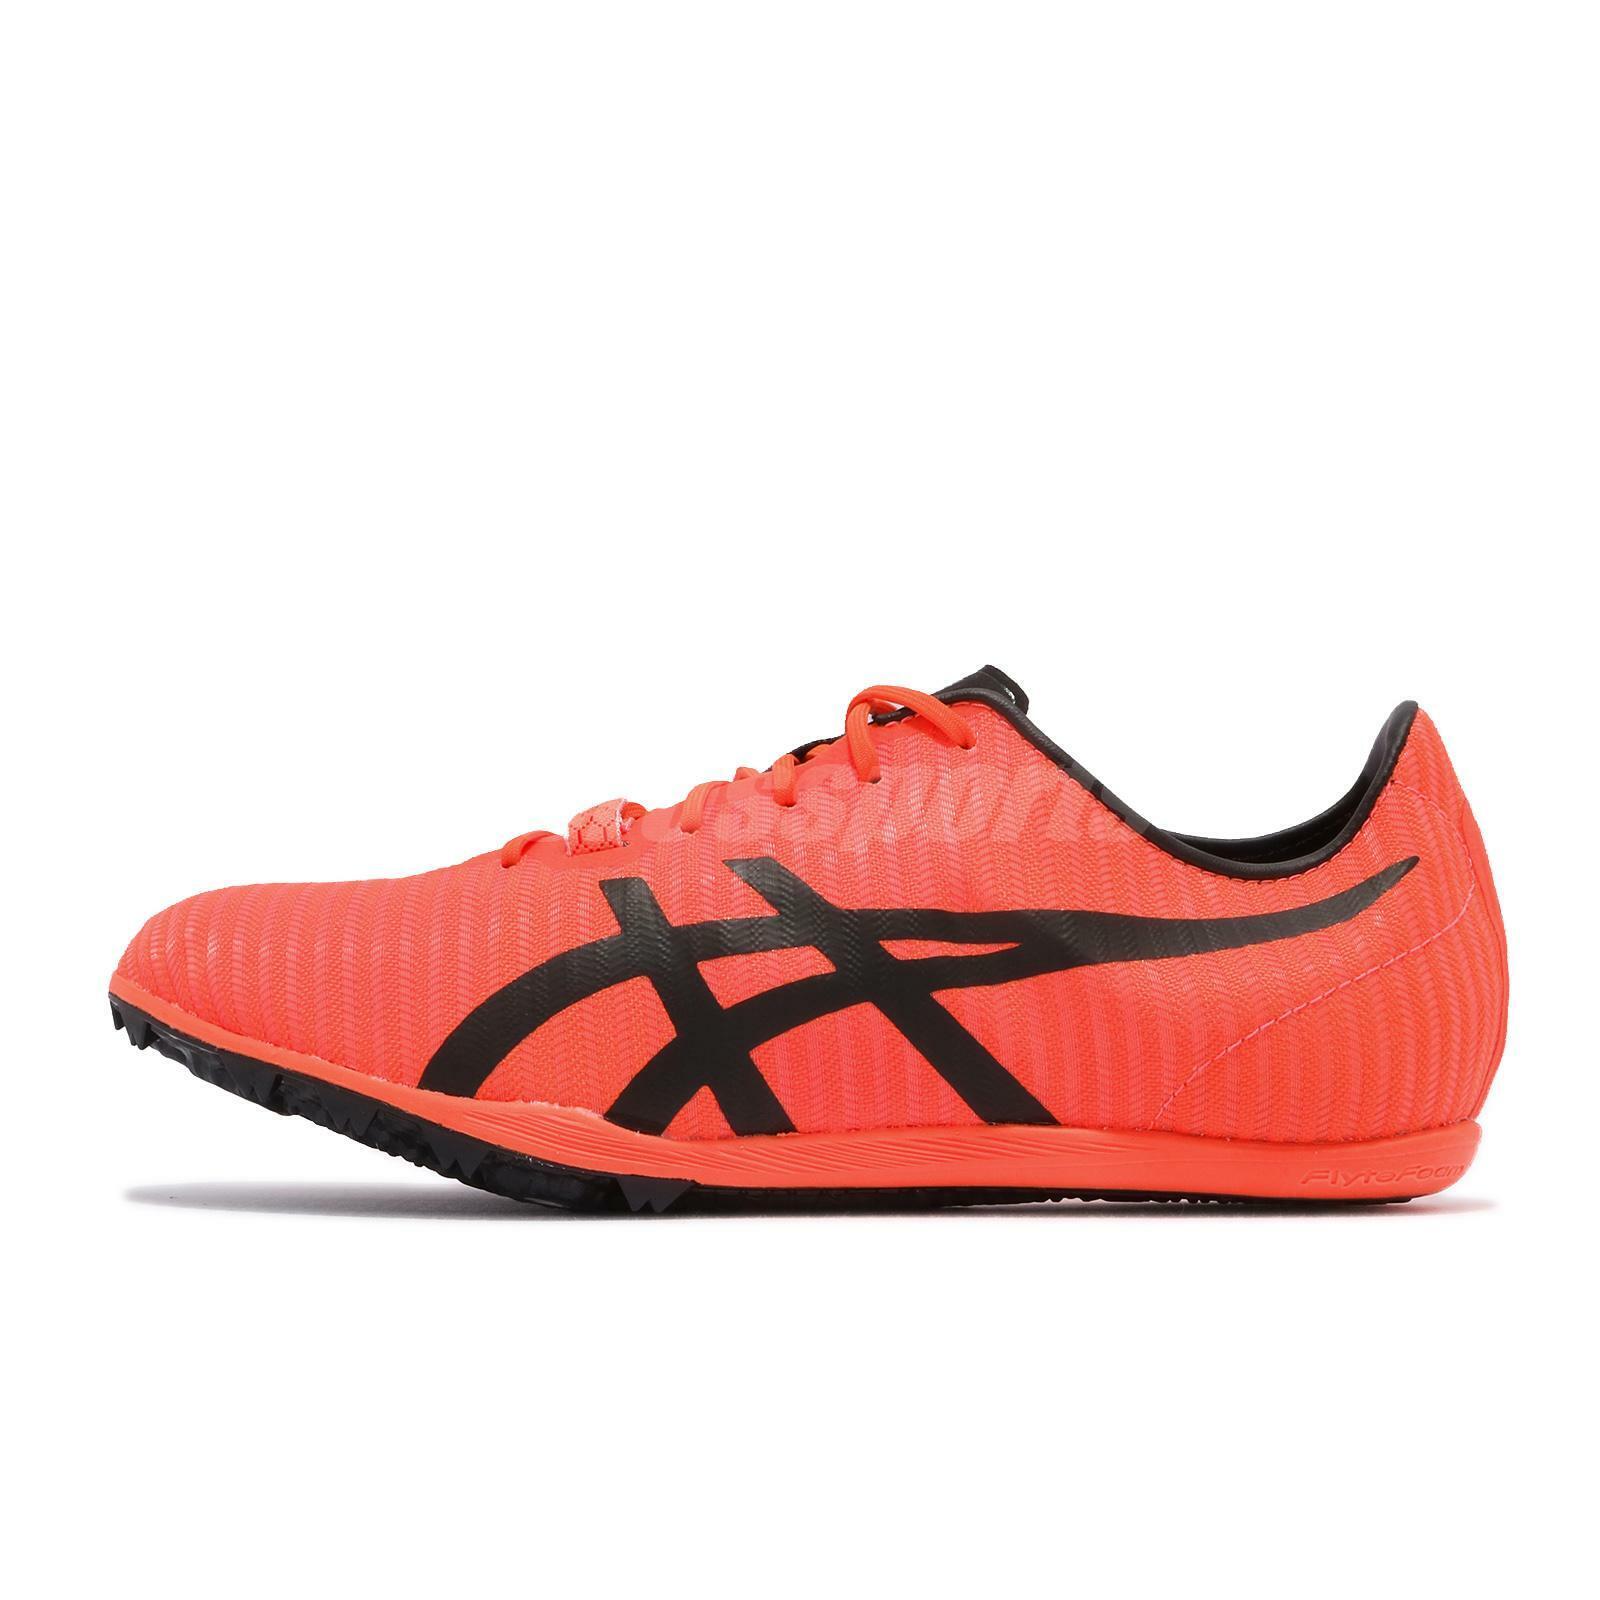 Asics Cosmoracer MD 2 Red Black Men Track And Field Running Shoes 